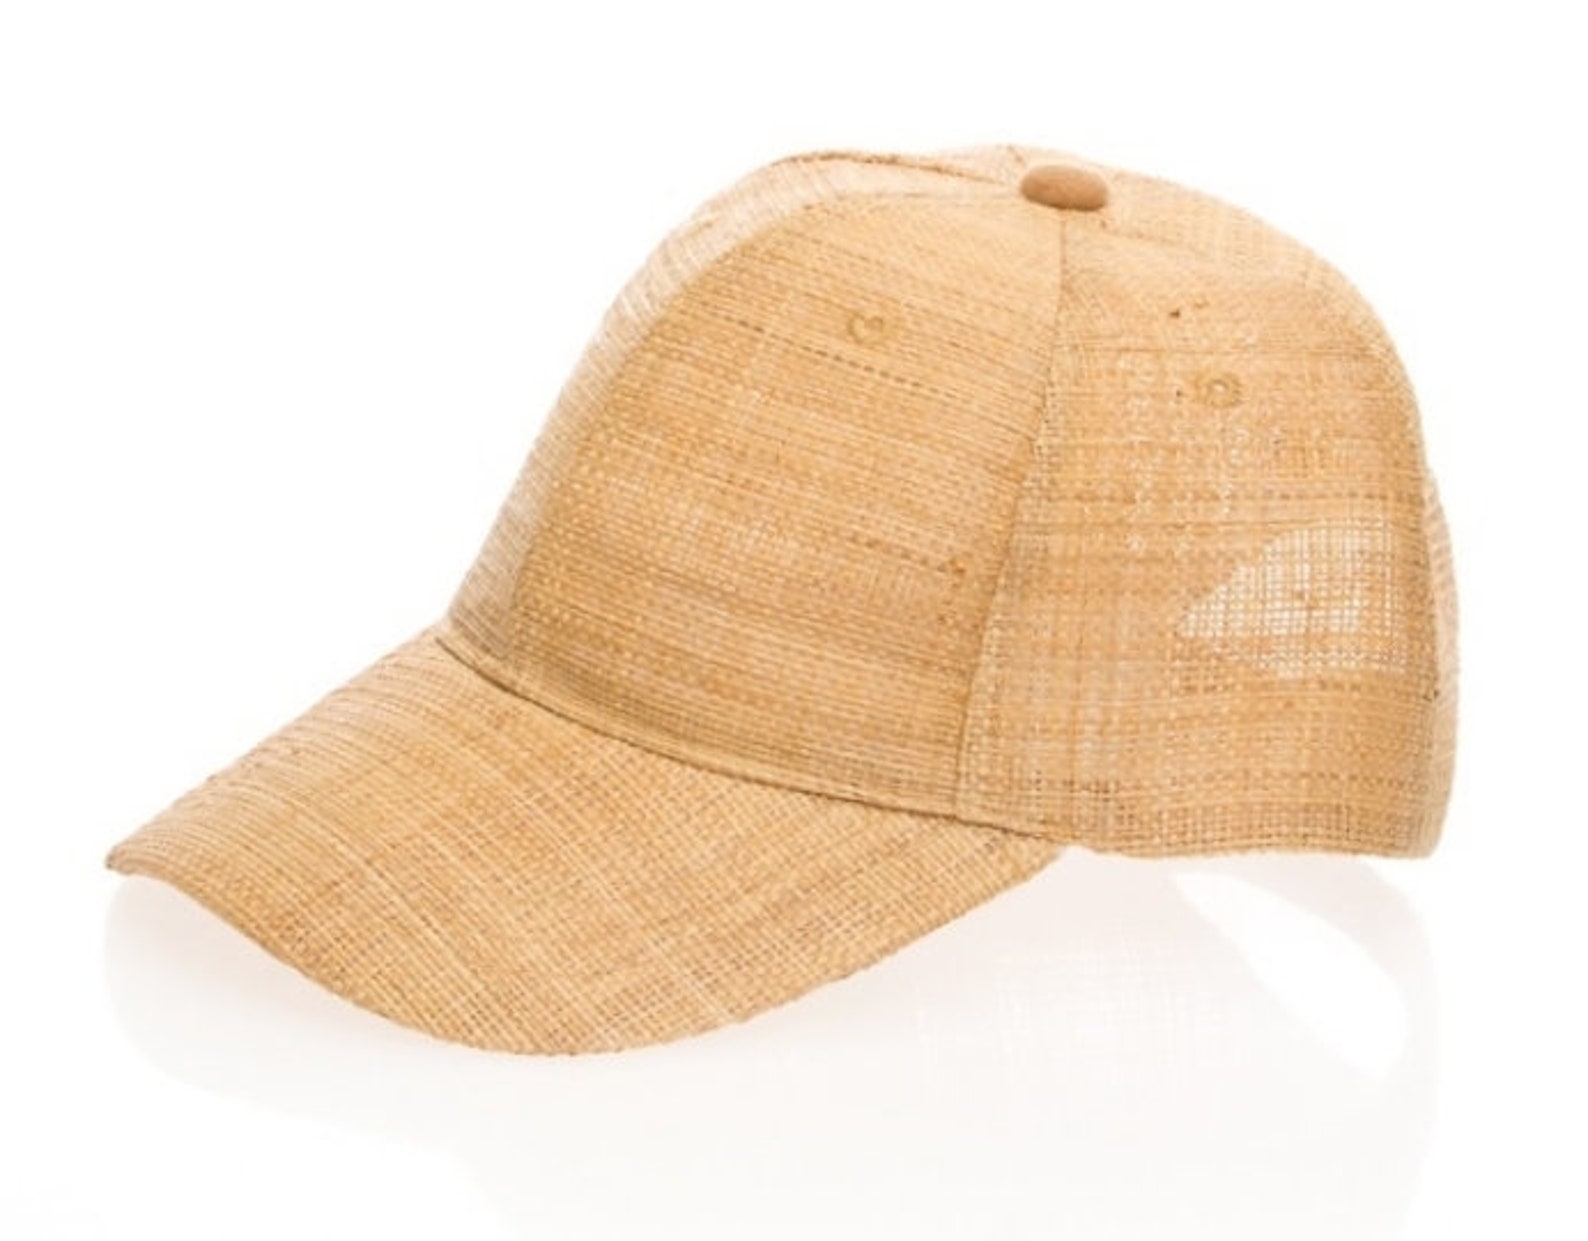 Baseball Cap With 100% Raffia Straw is the Perfect for the - Etsy